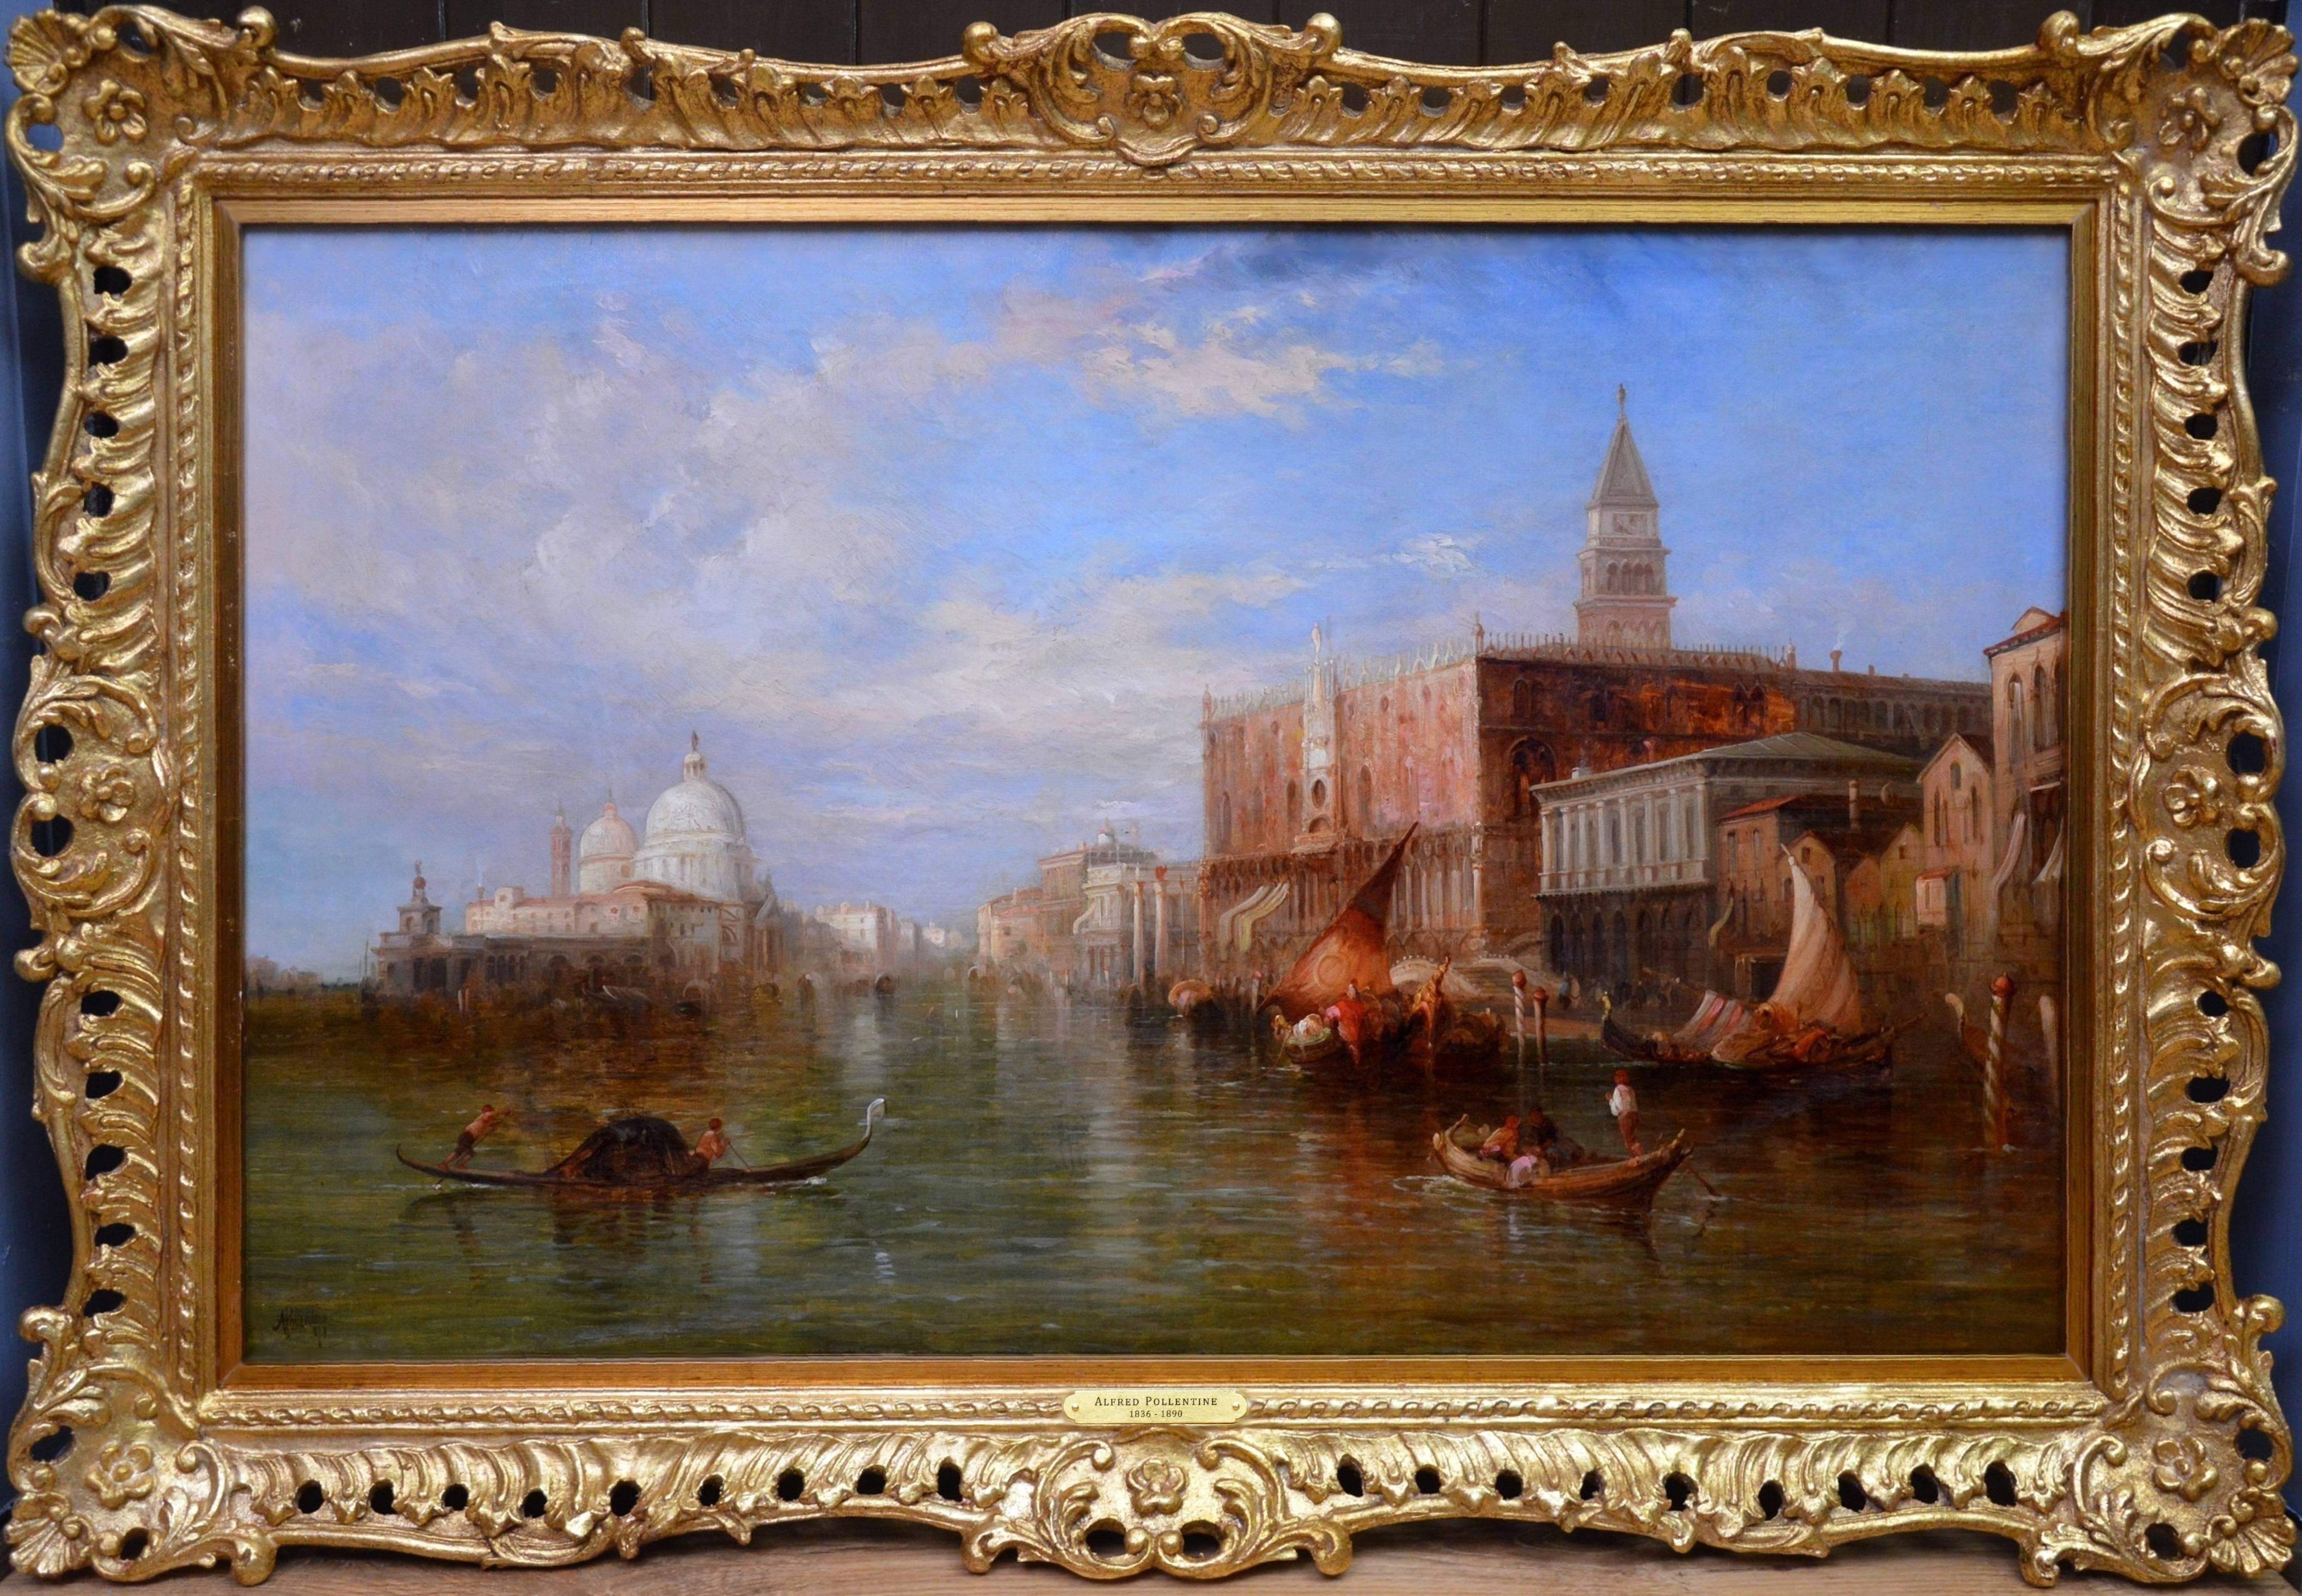 This is a large fine 19th century oil on canvas depicting a typically beautiful scene over ‘The Grand Canal, Venice’ towards the Ducal Palace, St. Mark’s Square and the Santa Maria della Salute by the eminent Victorian landscape artist Alfred